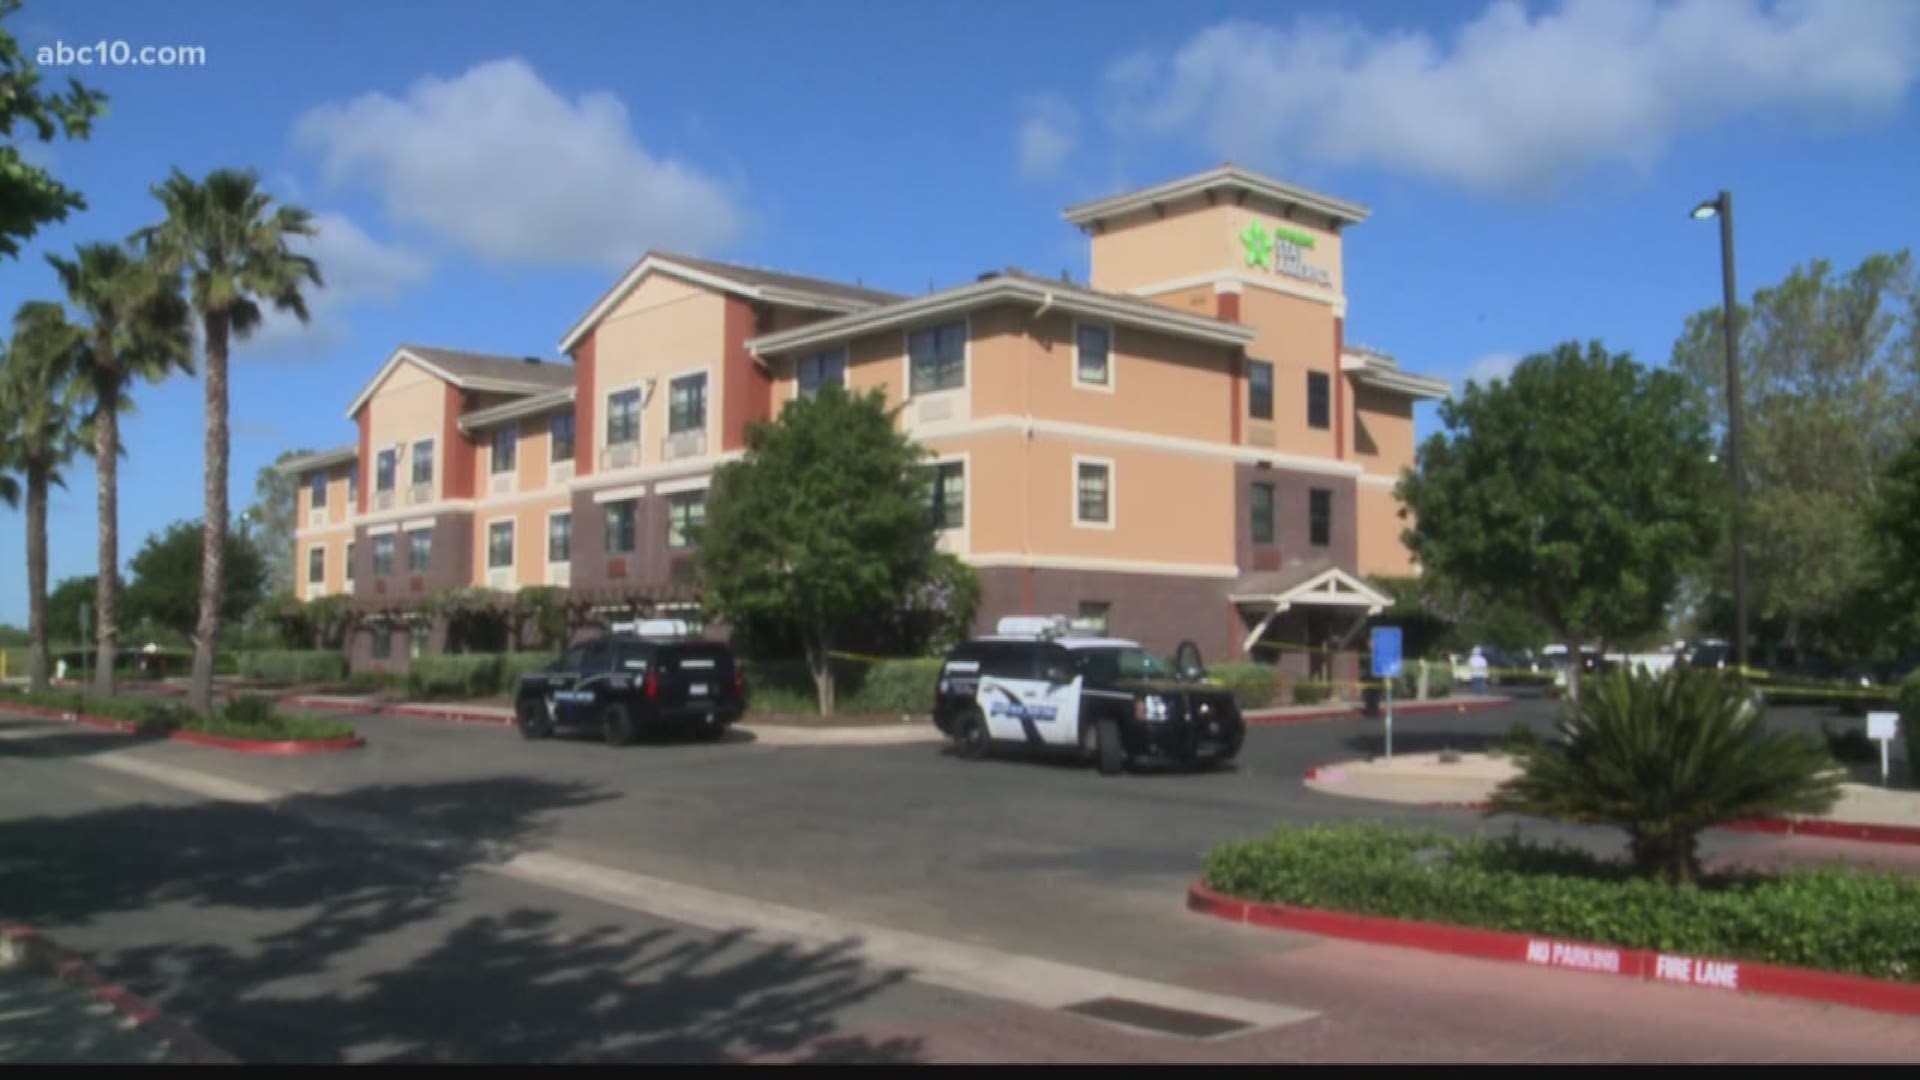 Police shoot, kill suspect at extended stay hotel (April 28, 2018)